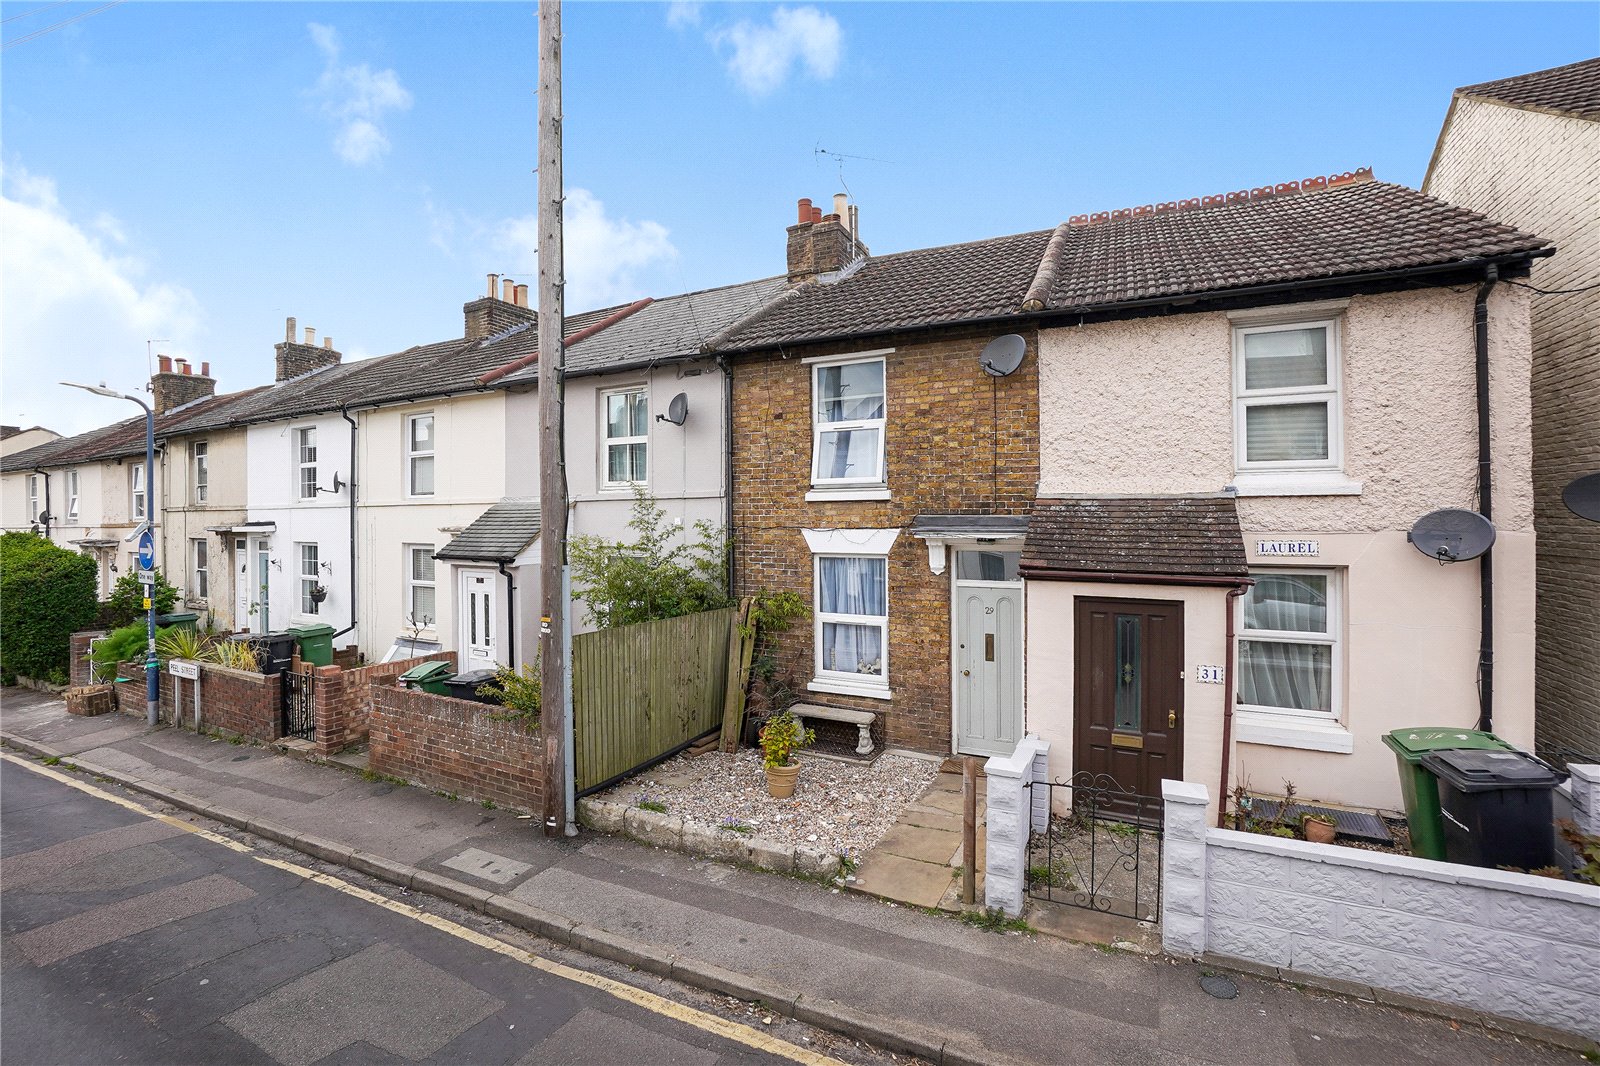 2 bed house for sale in Peel Street, Maidstone, ME14